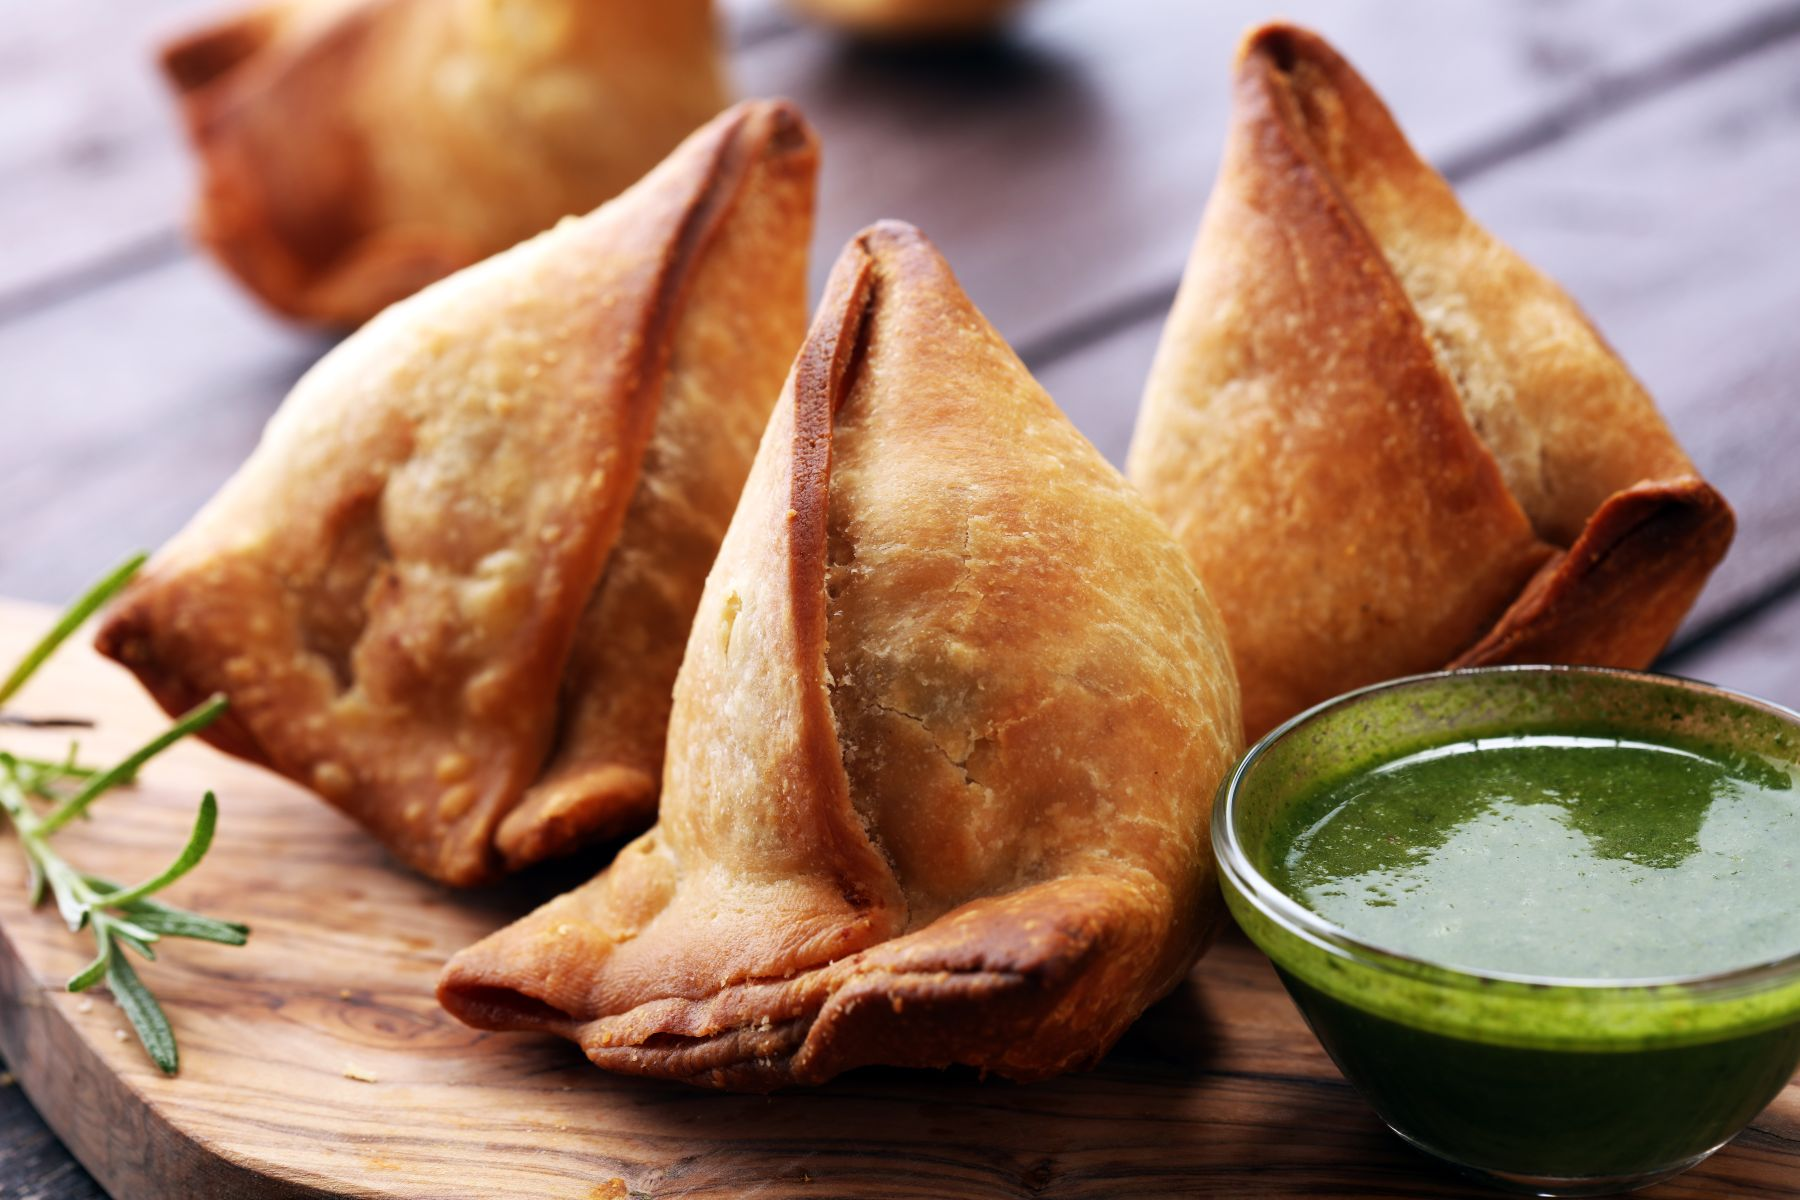 Samosa with zesty green chutney - a tempting Indian snack delight